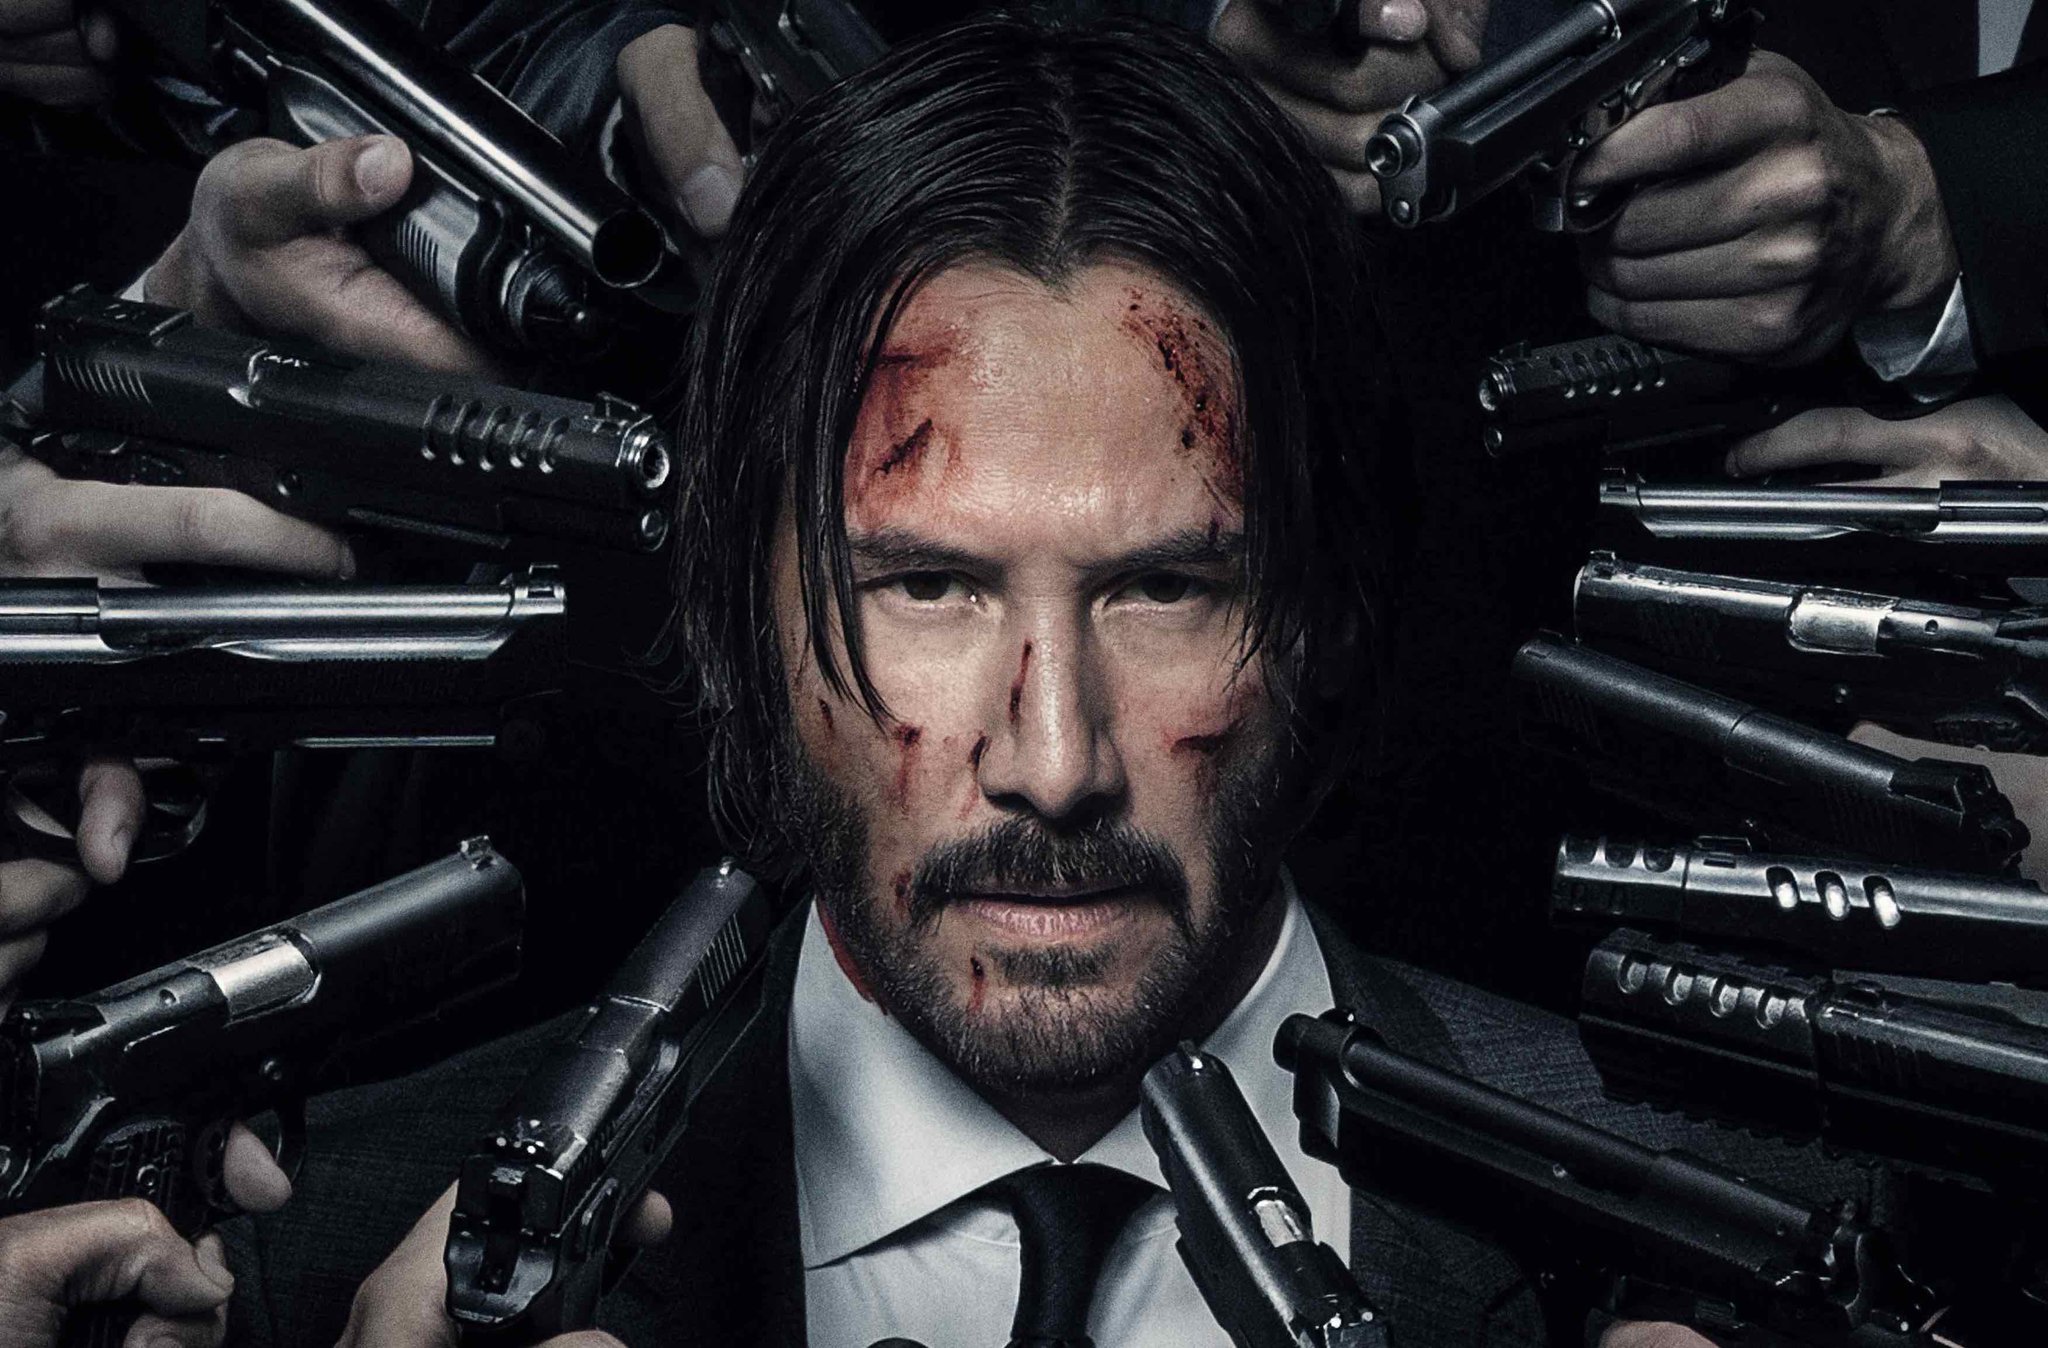 John Wick: Chapter 2 is a shameful example of Hollywood gun pornography, Movies